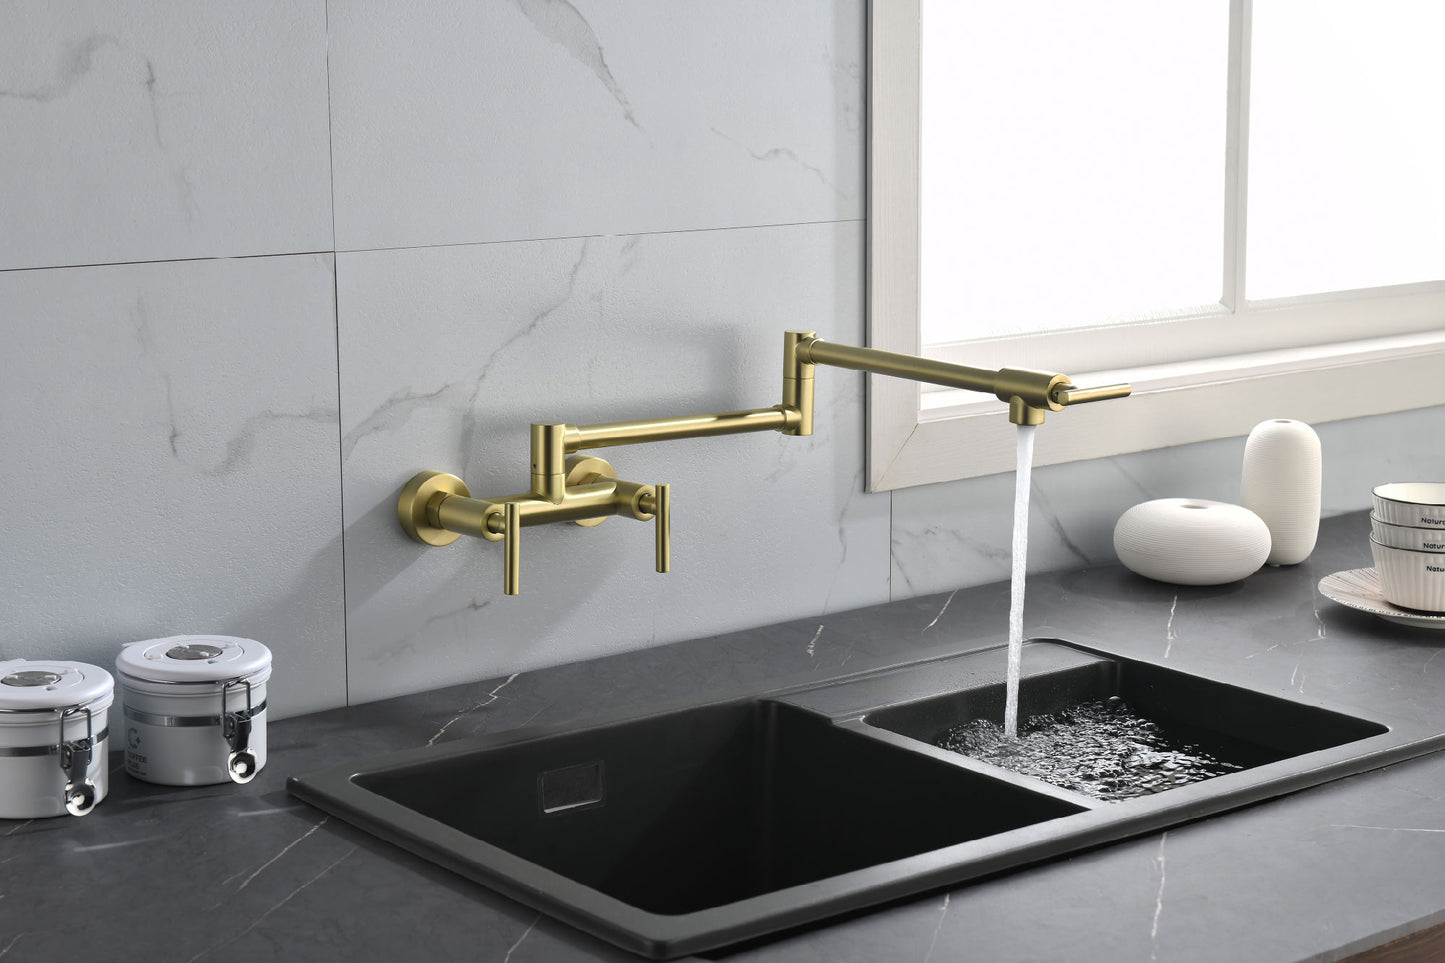 Pot Filler Faucets Both Hot Cold Water Wall Faucet Brass Faucets Kitchen Folding Kitchen Faucets Commercial Sink Faucet 3 Handles 2 Holes Joint Swing Arm Faucets